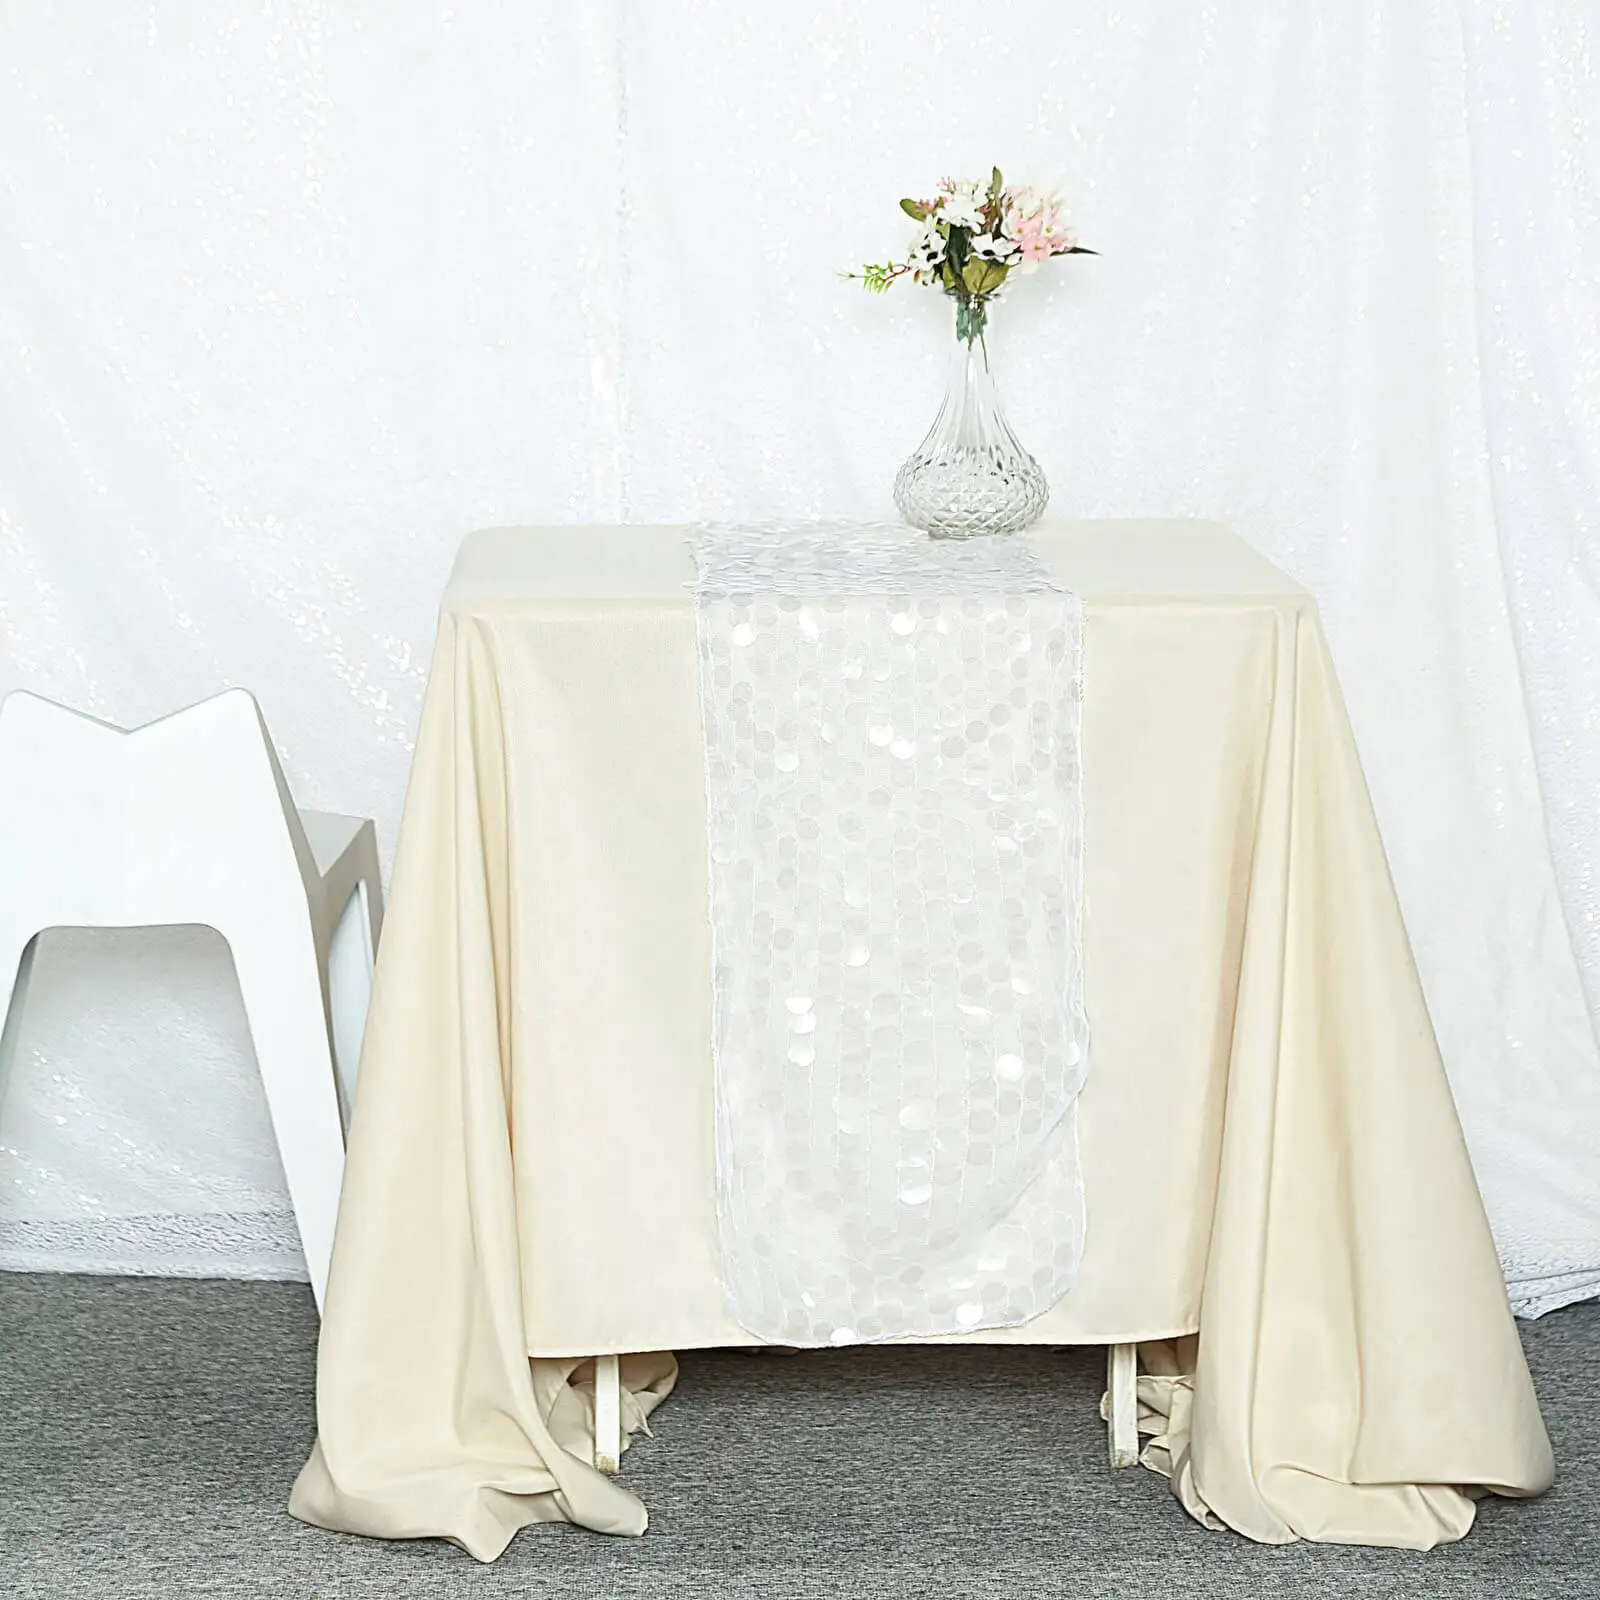 Best Sale Table Cloth Wholesale 13"x108" Big Sequin Runners Payette Table Runners